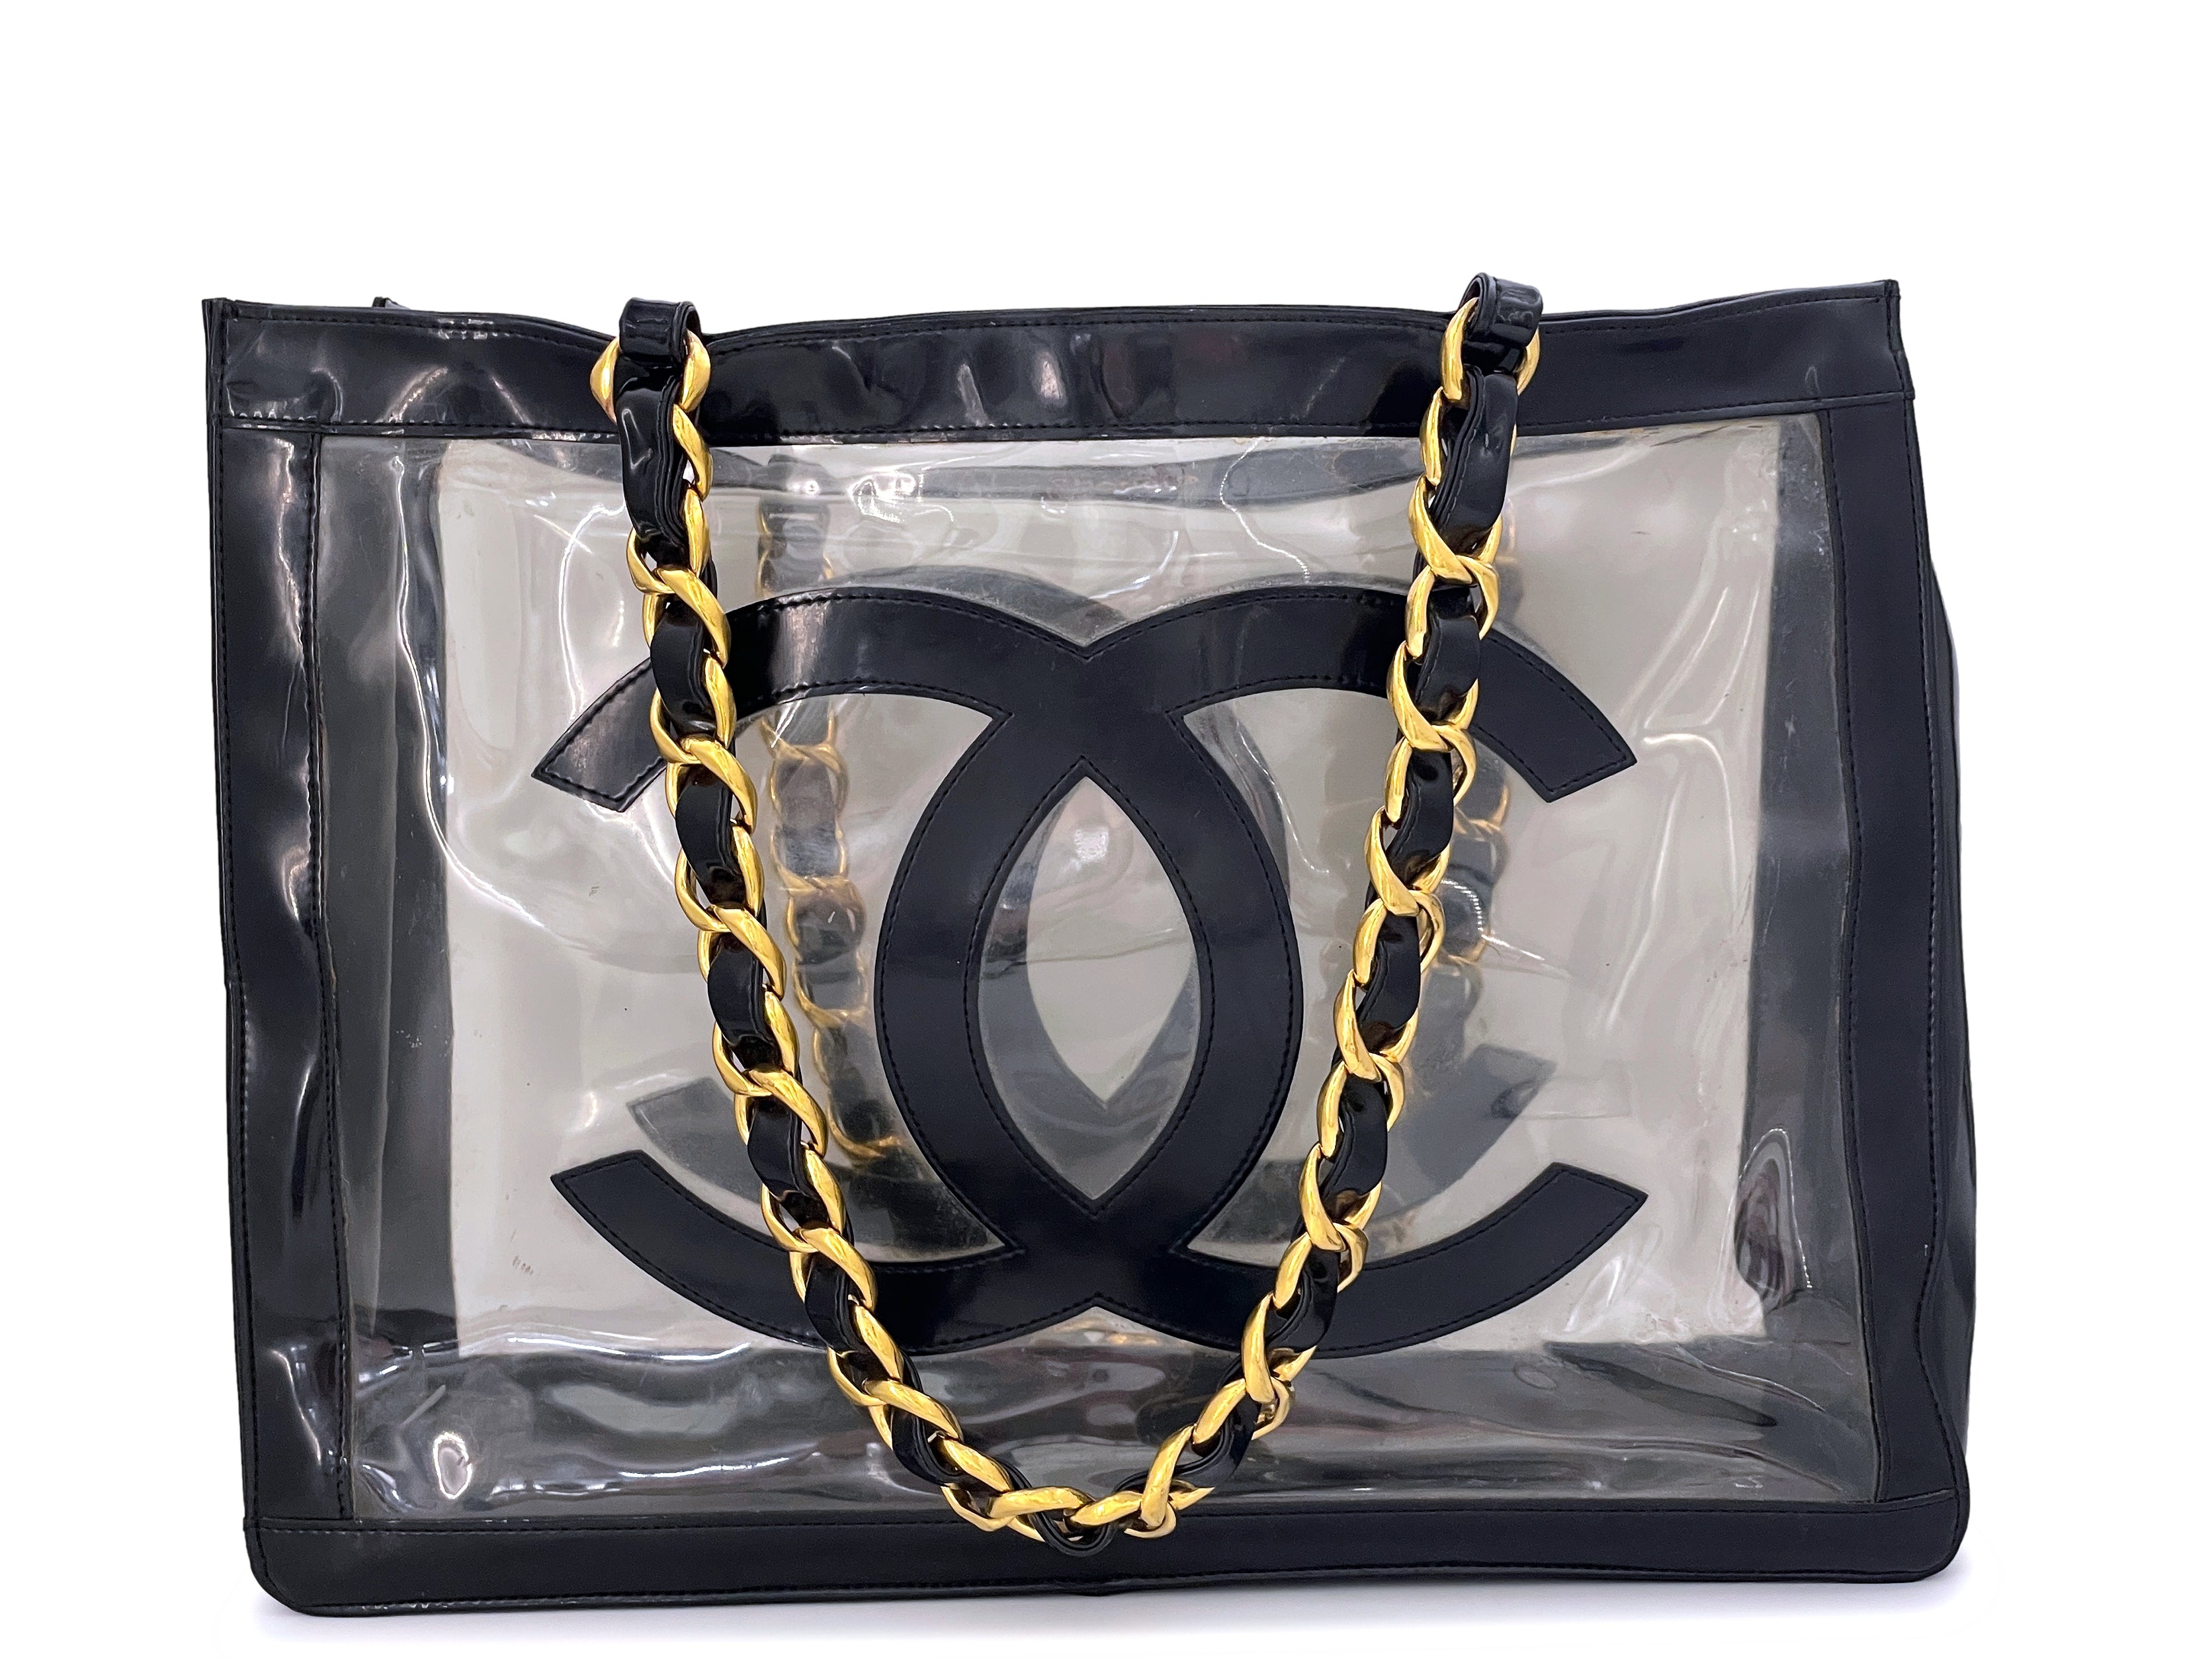 chanel chain strap for bag